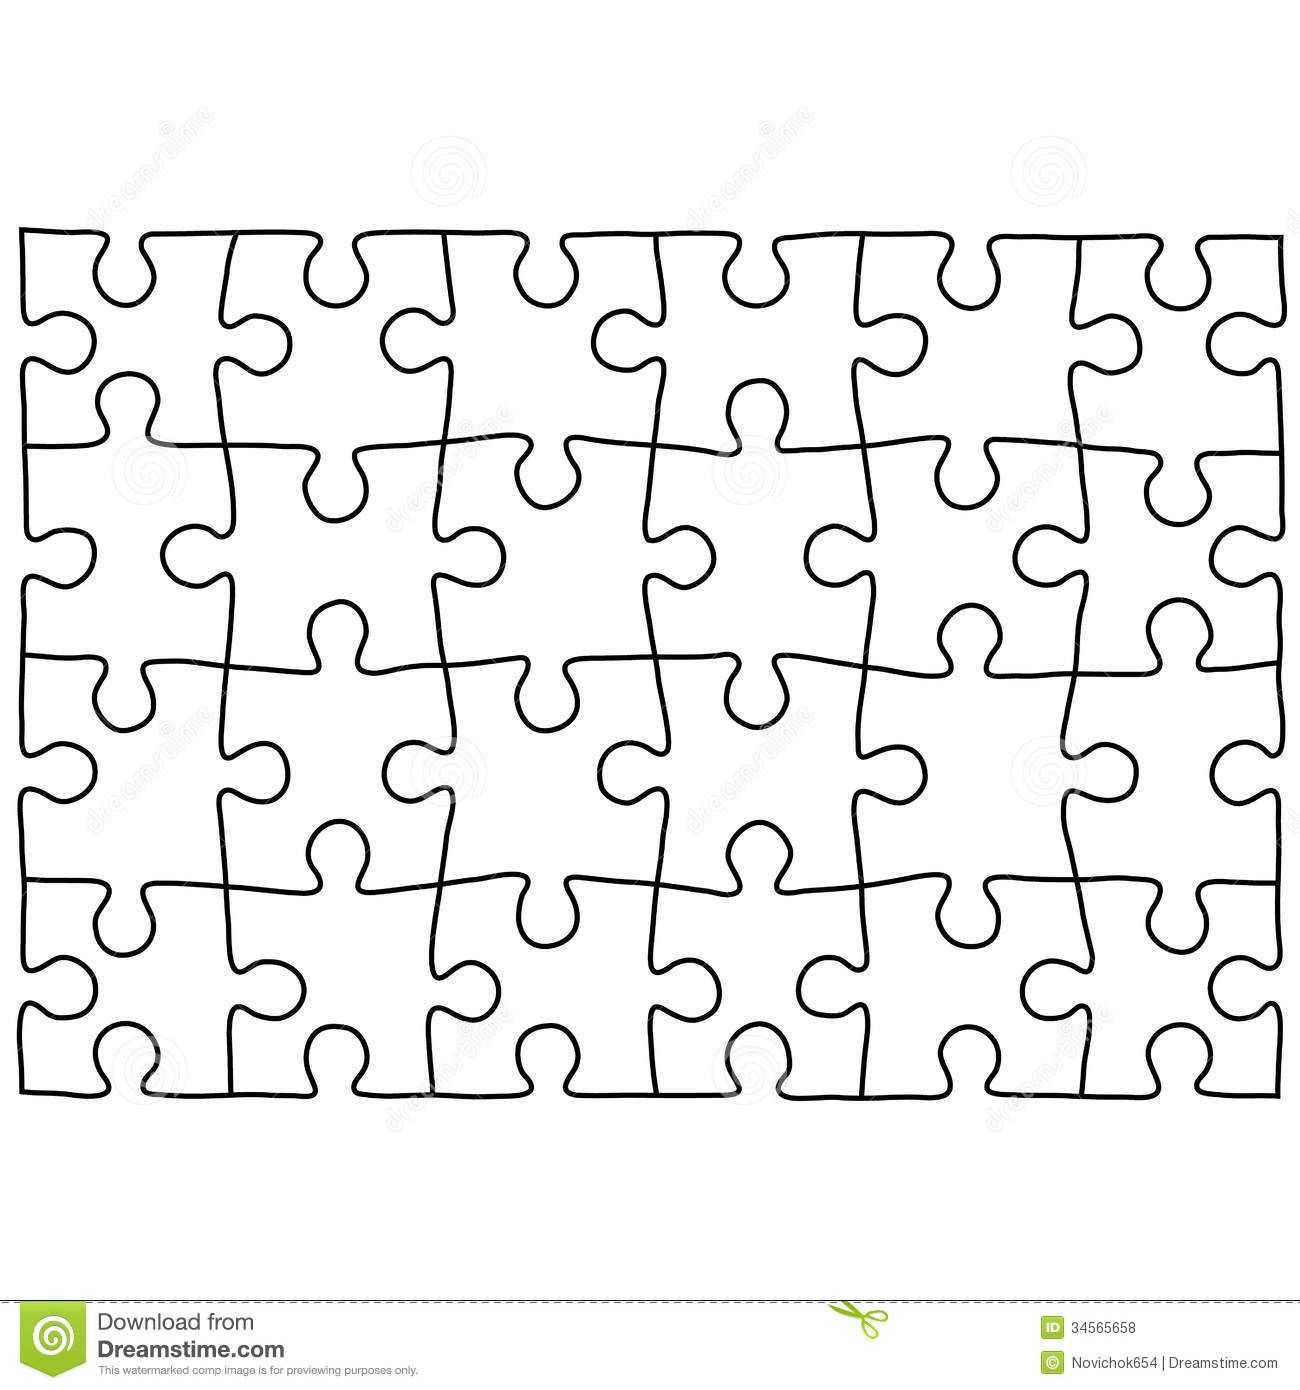 026 Jig Saw Puzzle Template Ideas Astounding Jigsaw Free Intended For Jigsaw Puzzle Template For Word